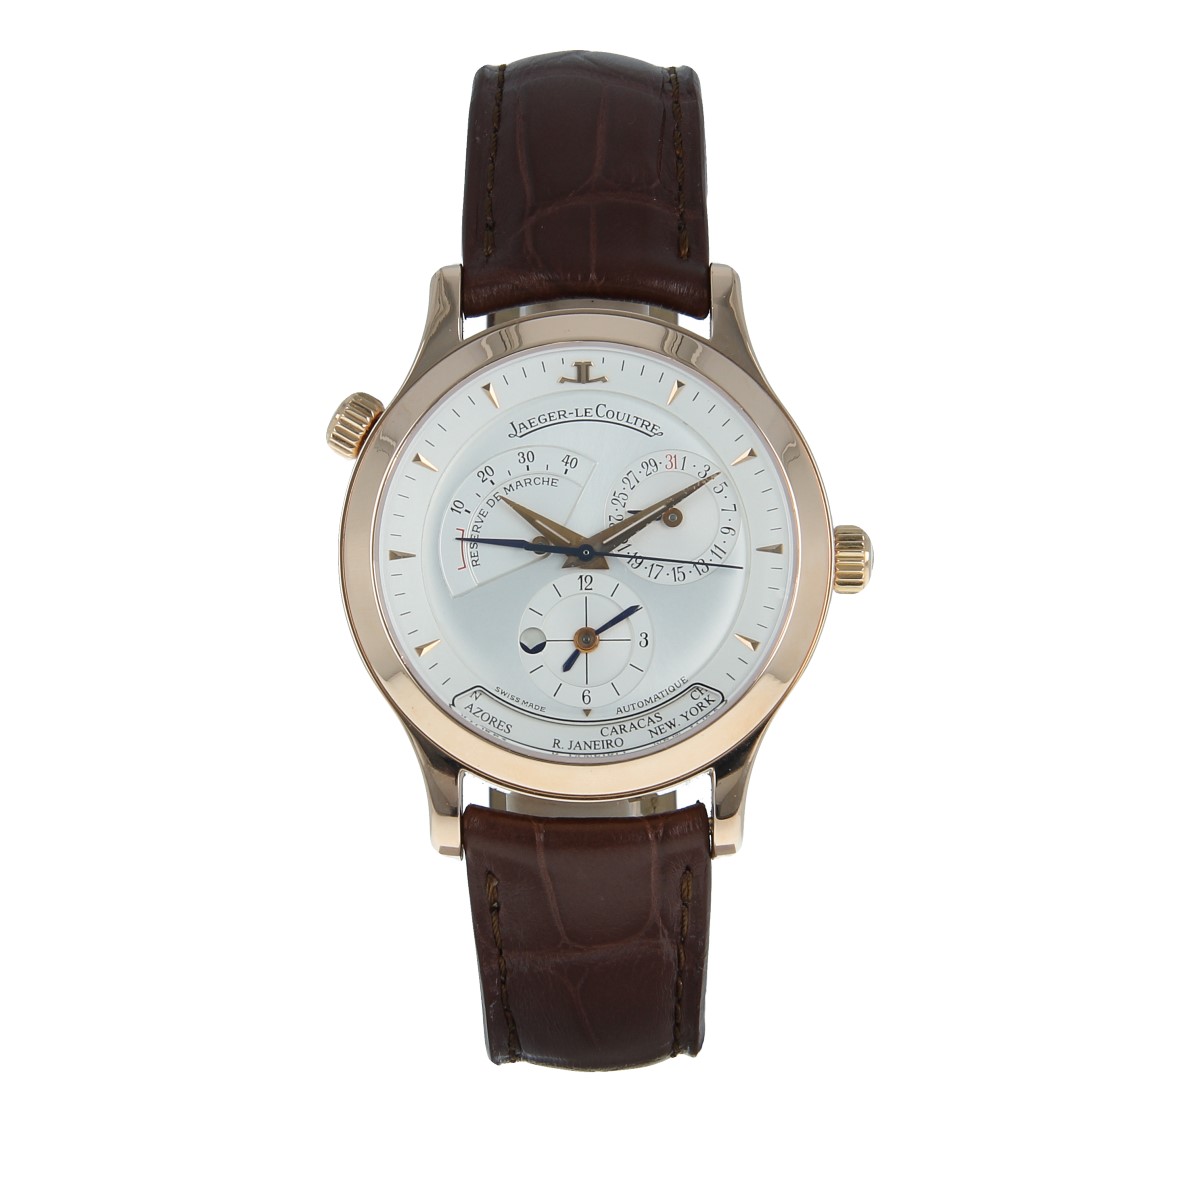 Jaeger-LeCoultre Master Control Geographic Rose Gold | Buy pre-owned Jaeger-LeCoultre watch